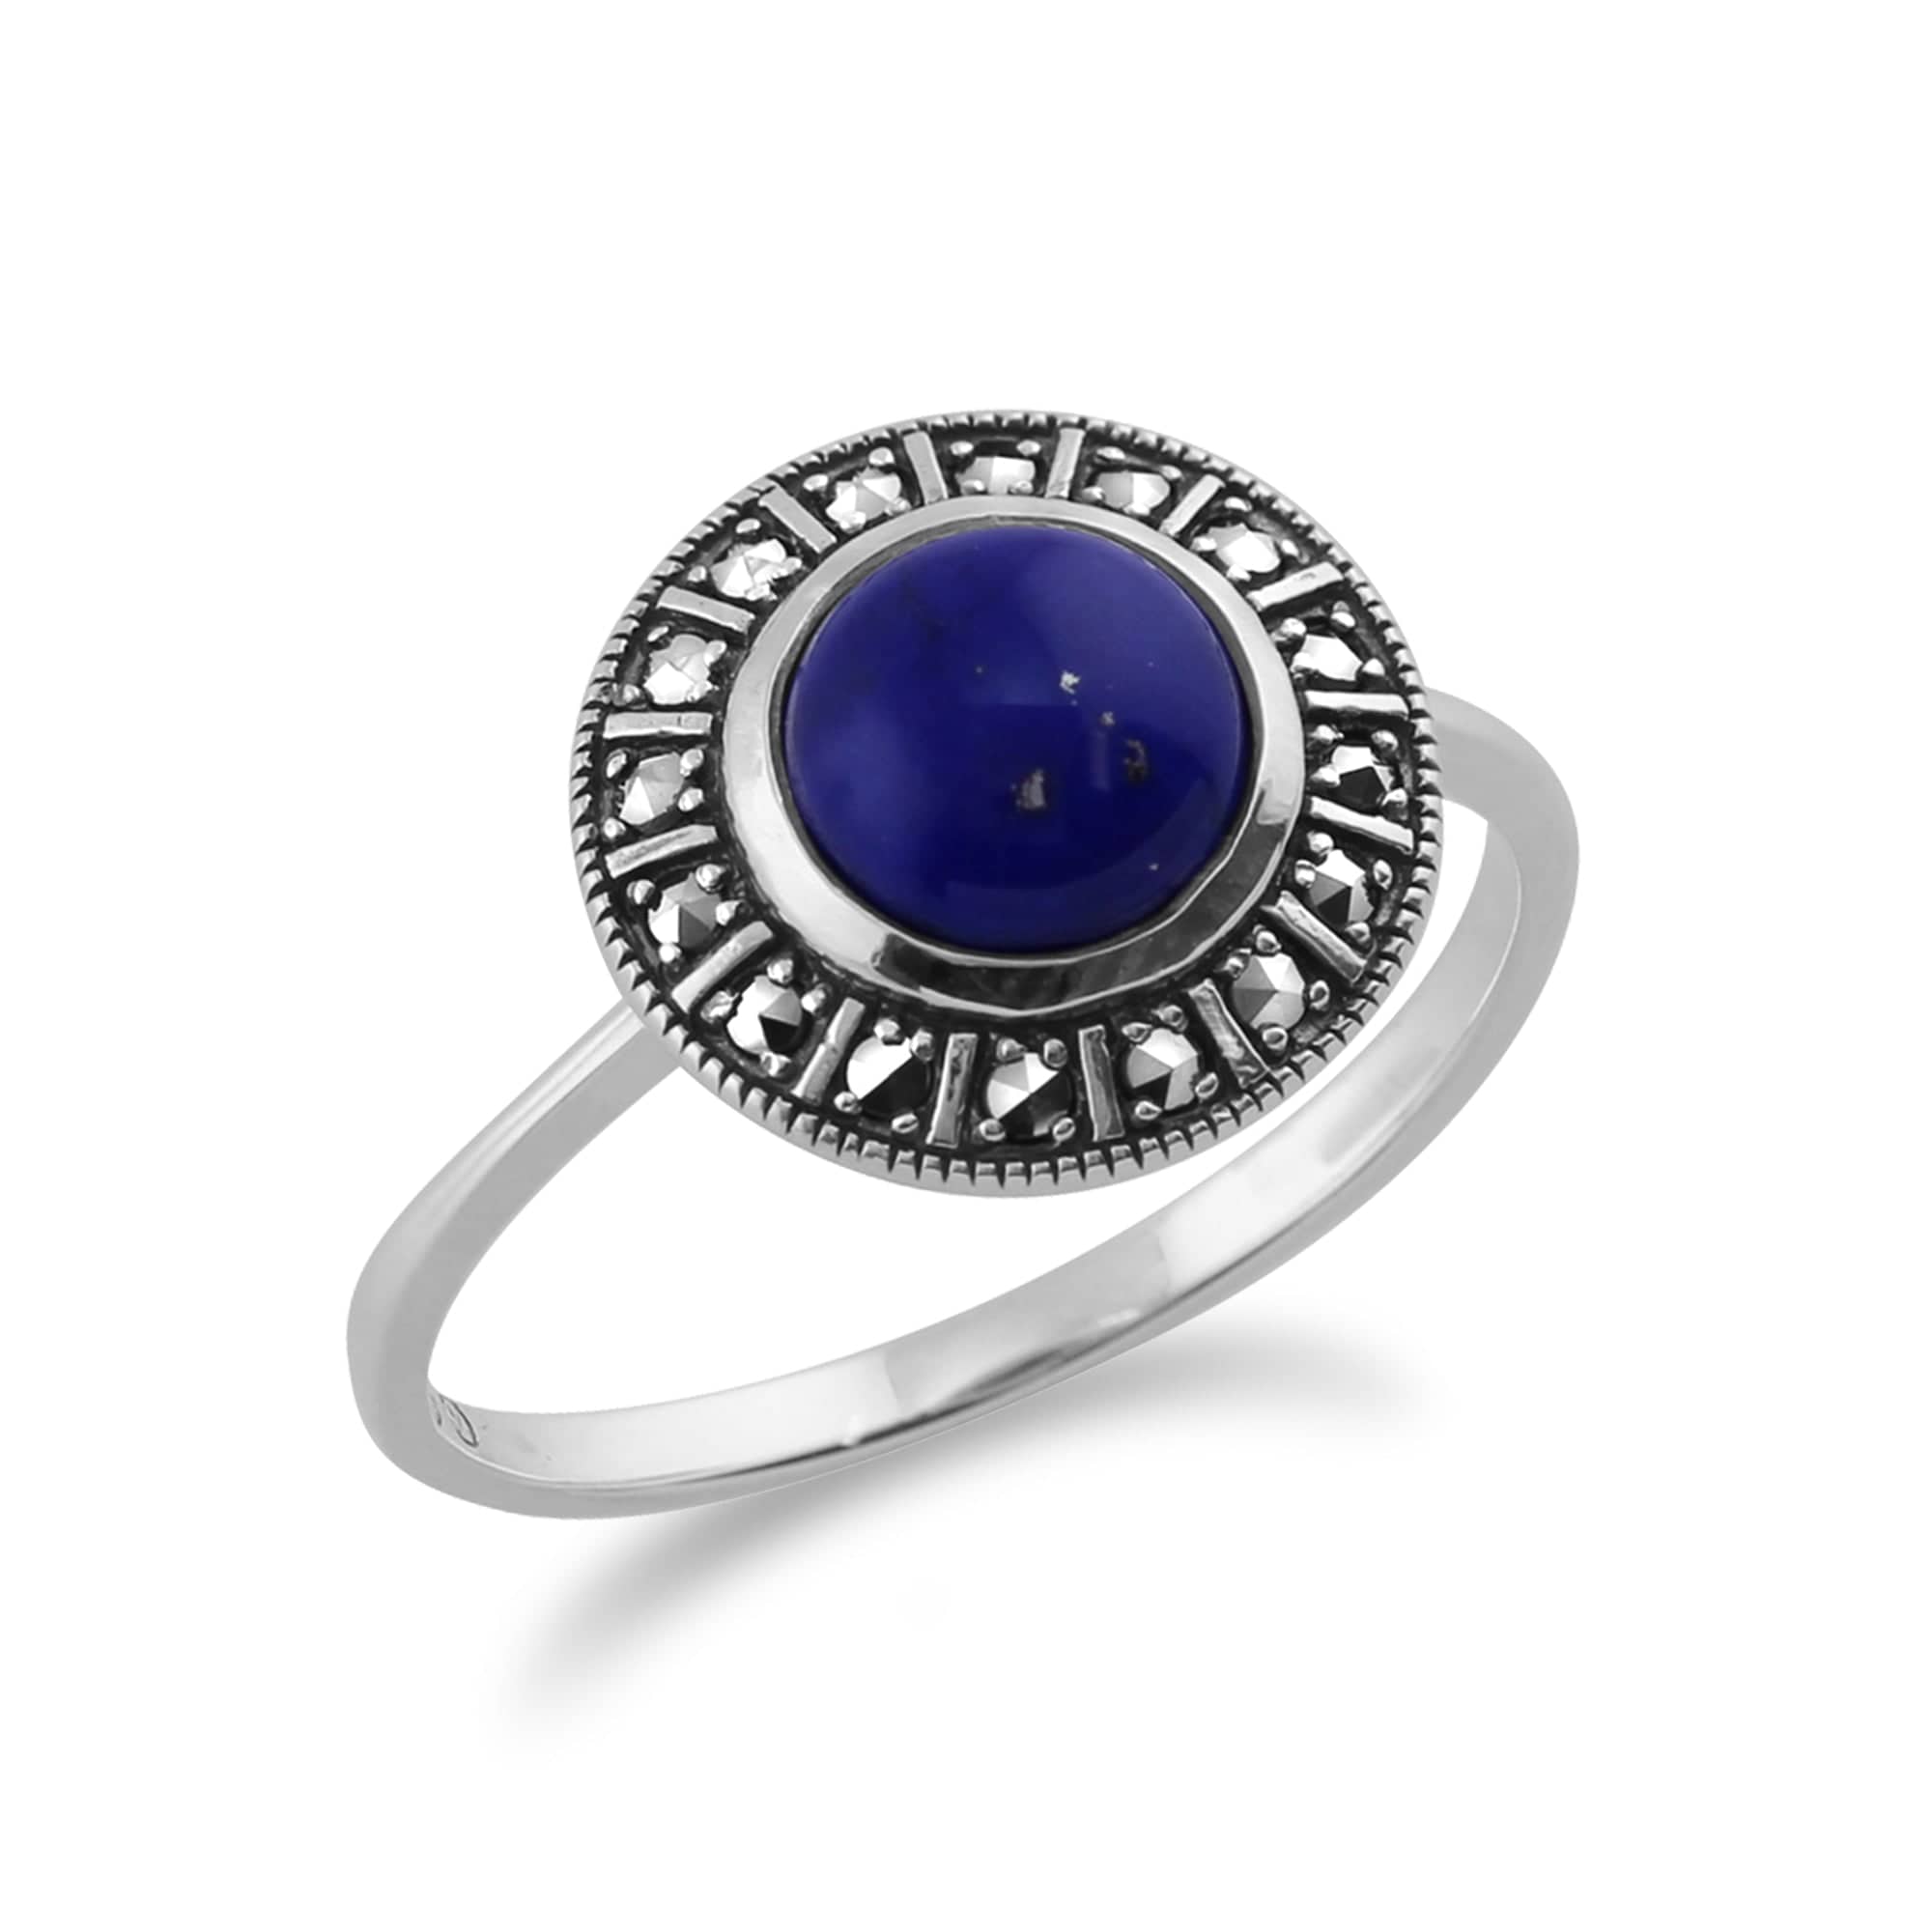 214R513408925 Art Deco Style Round Lapis Lazuli Cabochon & Marcasite Halo Ring in 925 Sterling Silver 2